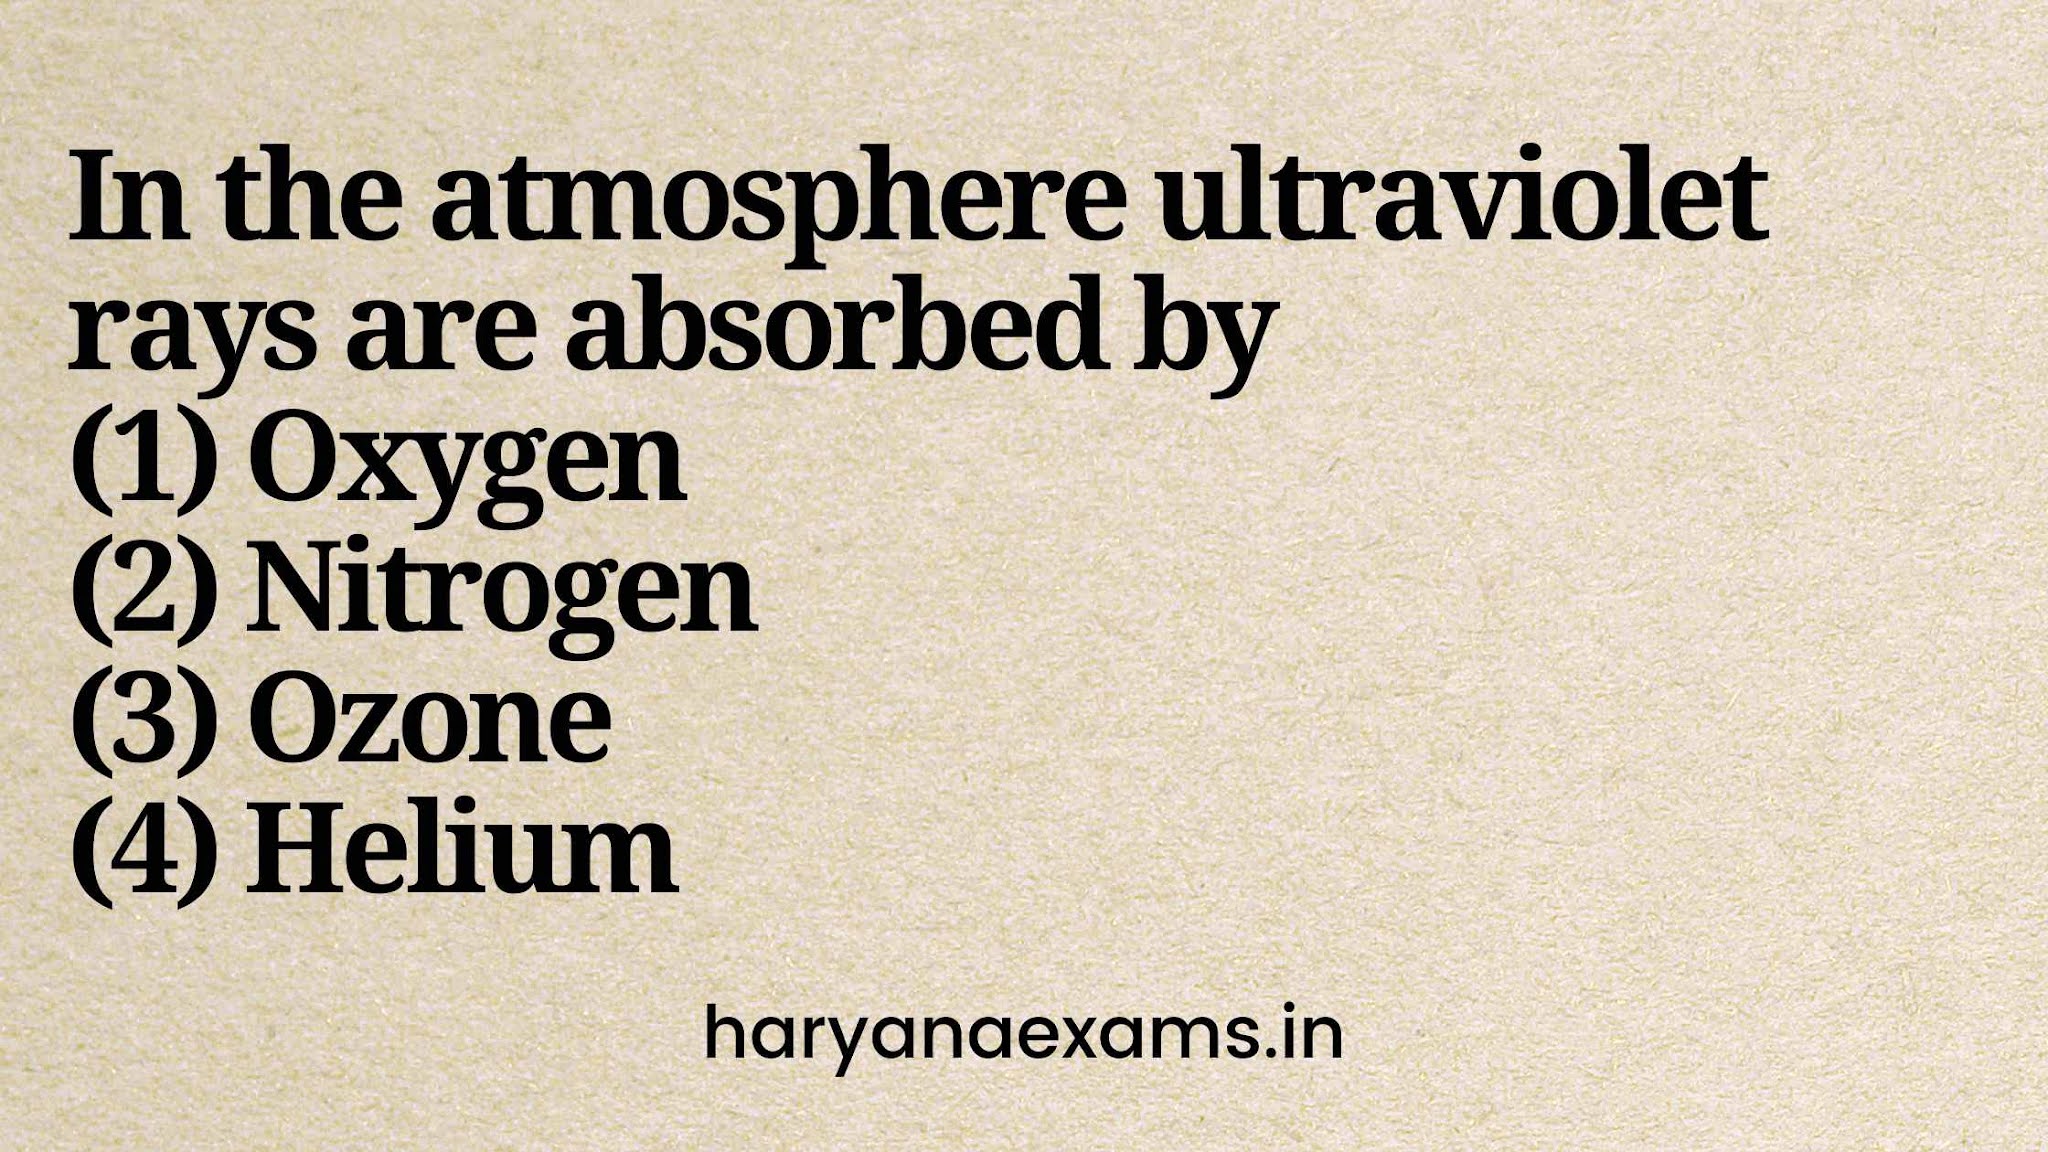 In the atmosphere ultraviolet rays are absorbed by   (1) Oxygen   (2) Nitrogen   (3) Ozone   (4) Helium